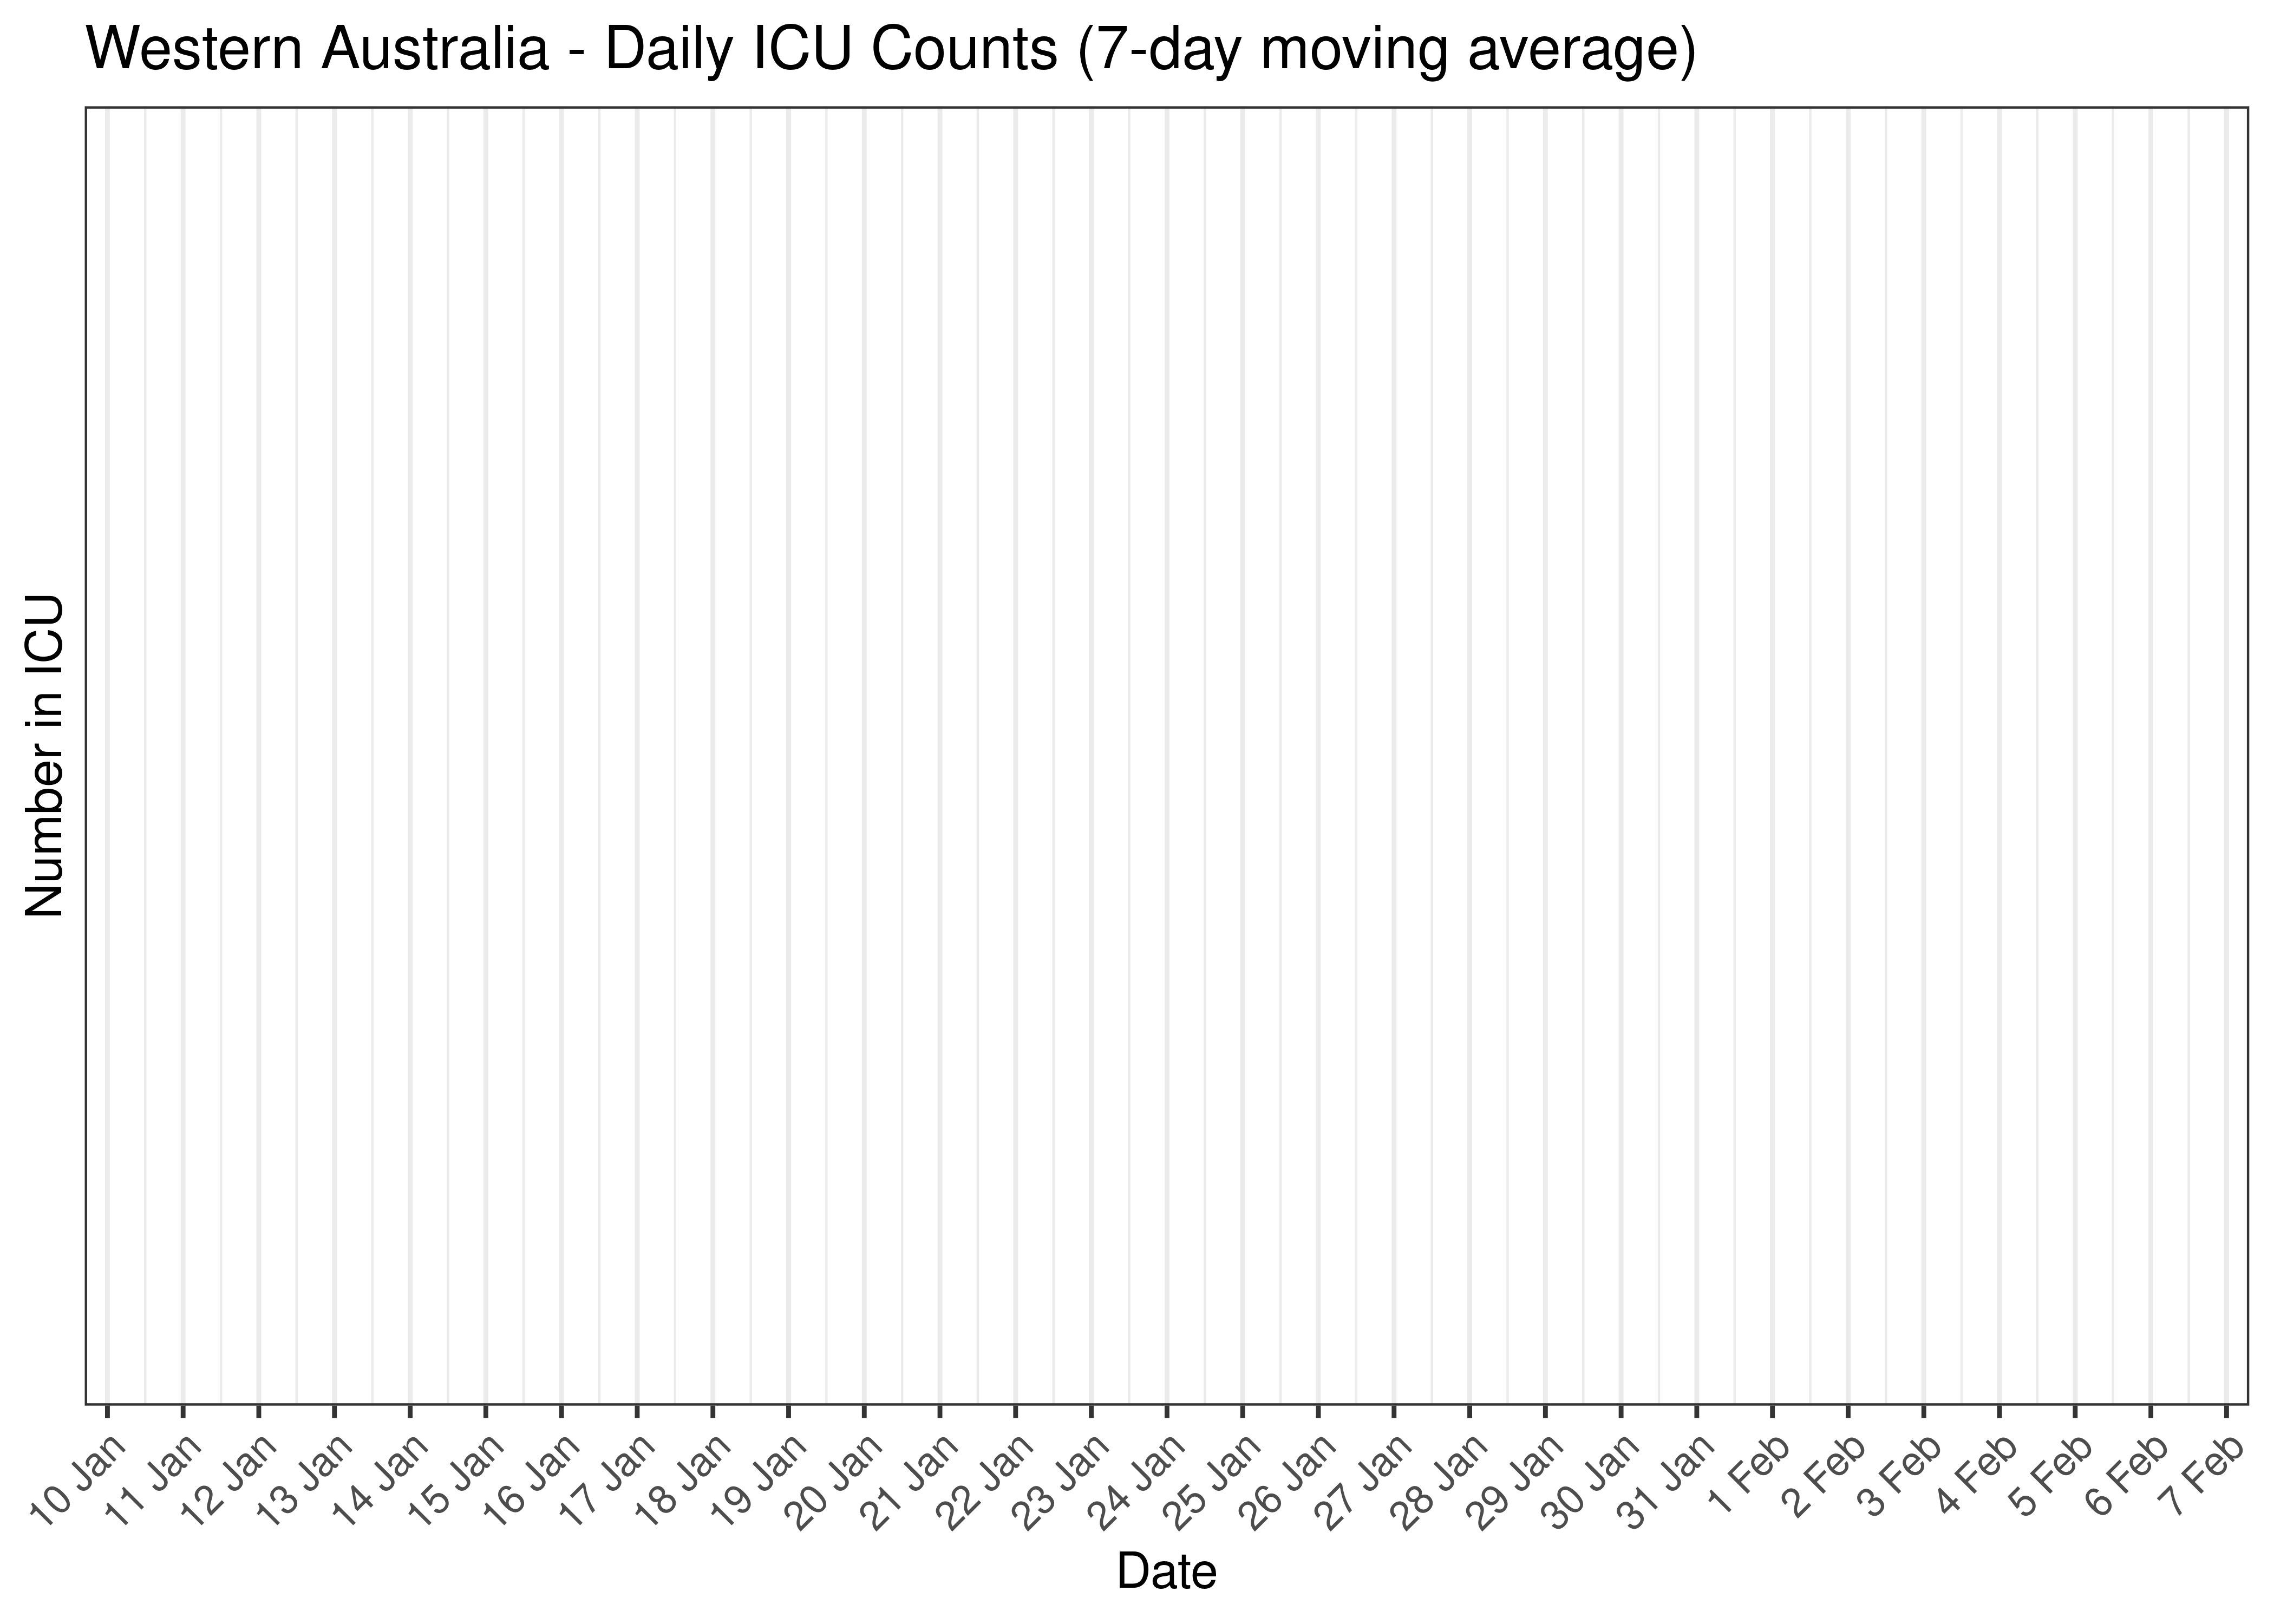 Western Australia - Daily ICU Counts for Last 30-days (7-day moving average)